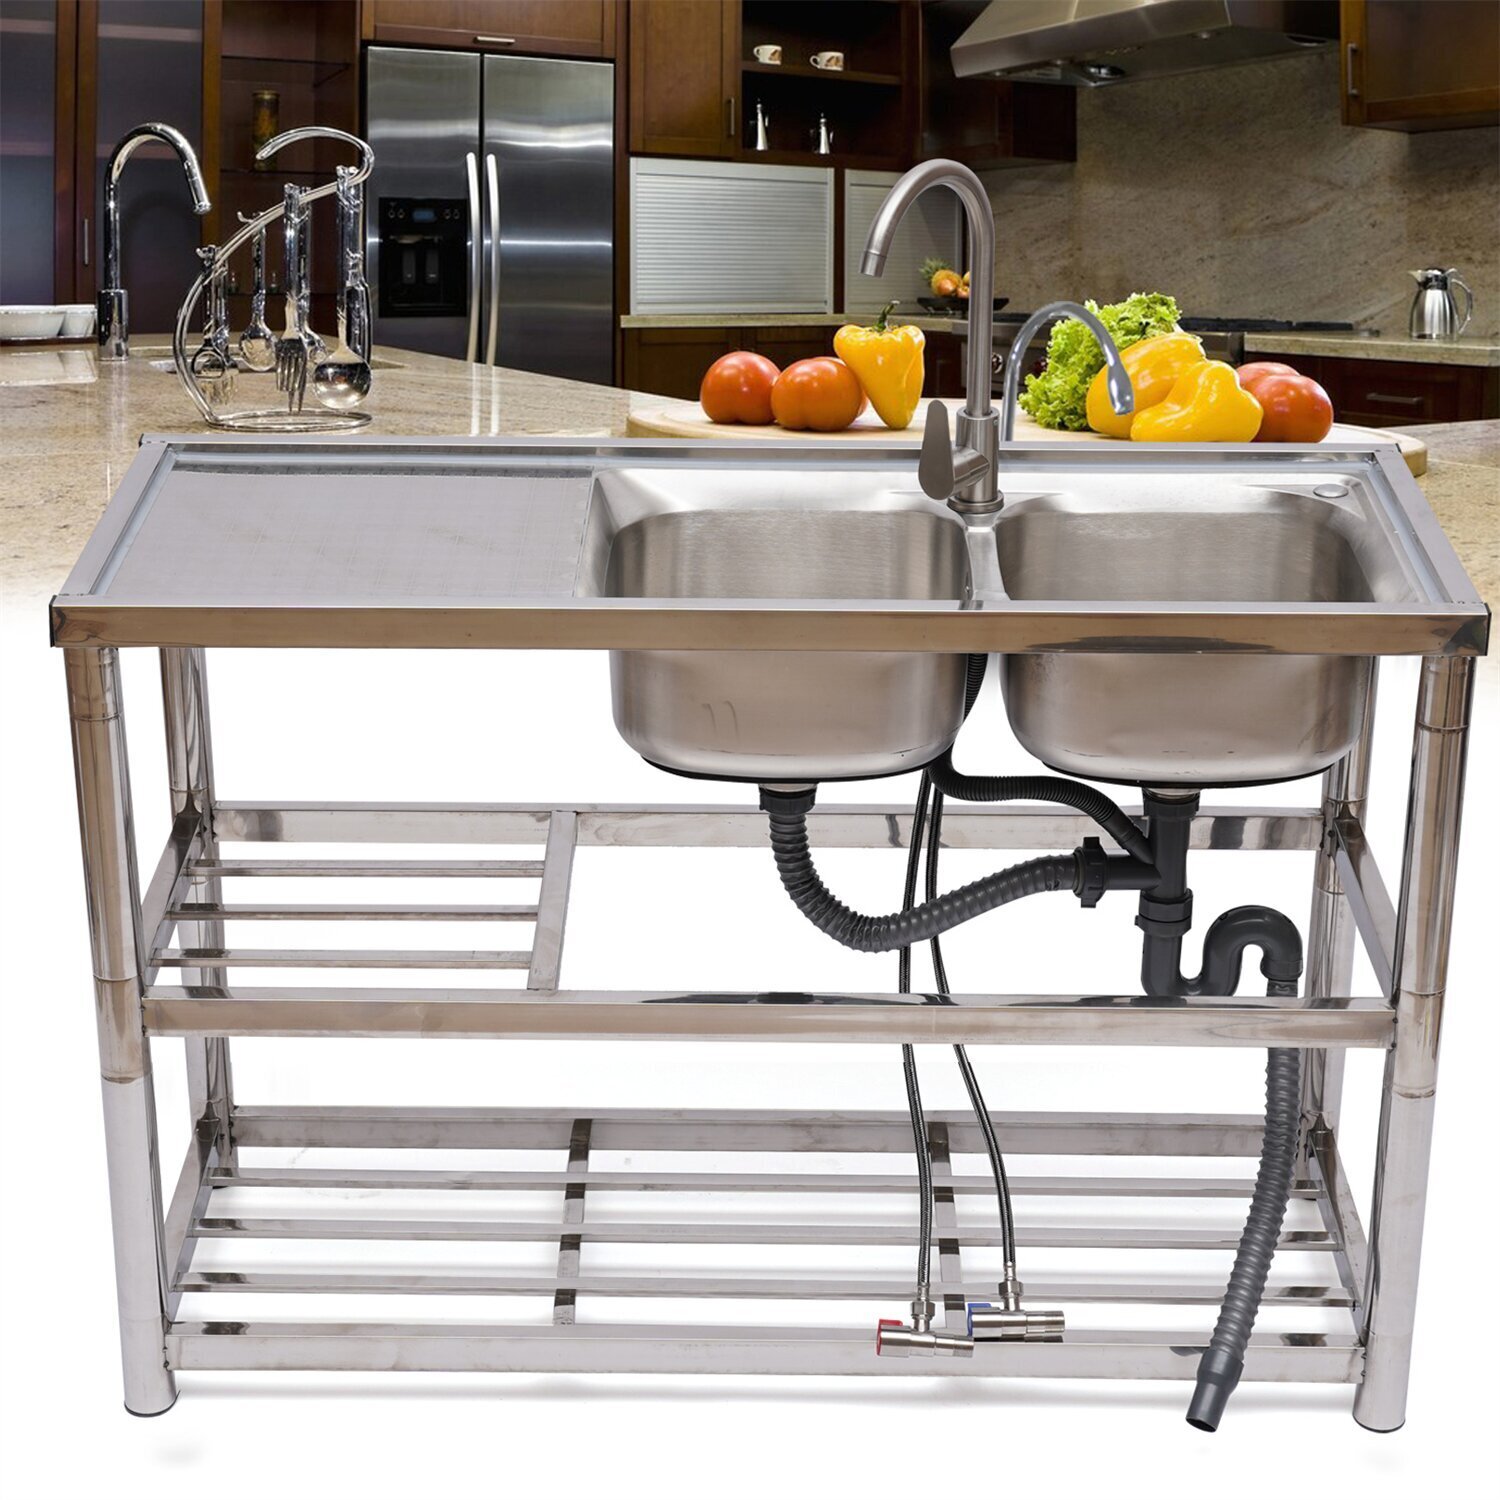 Double Bowl Sink With Storage